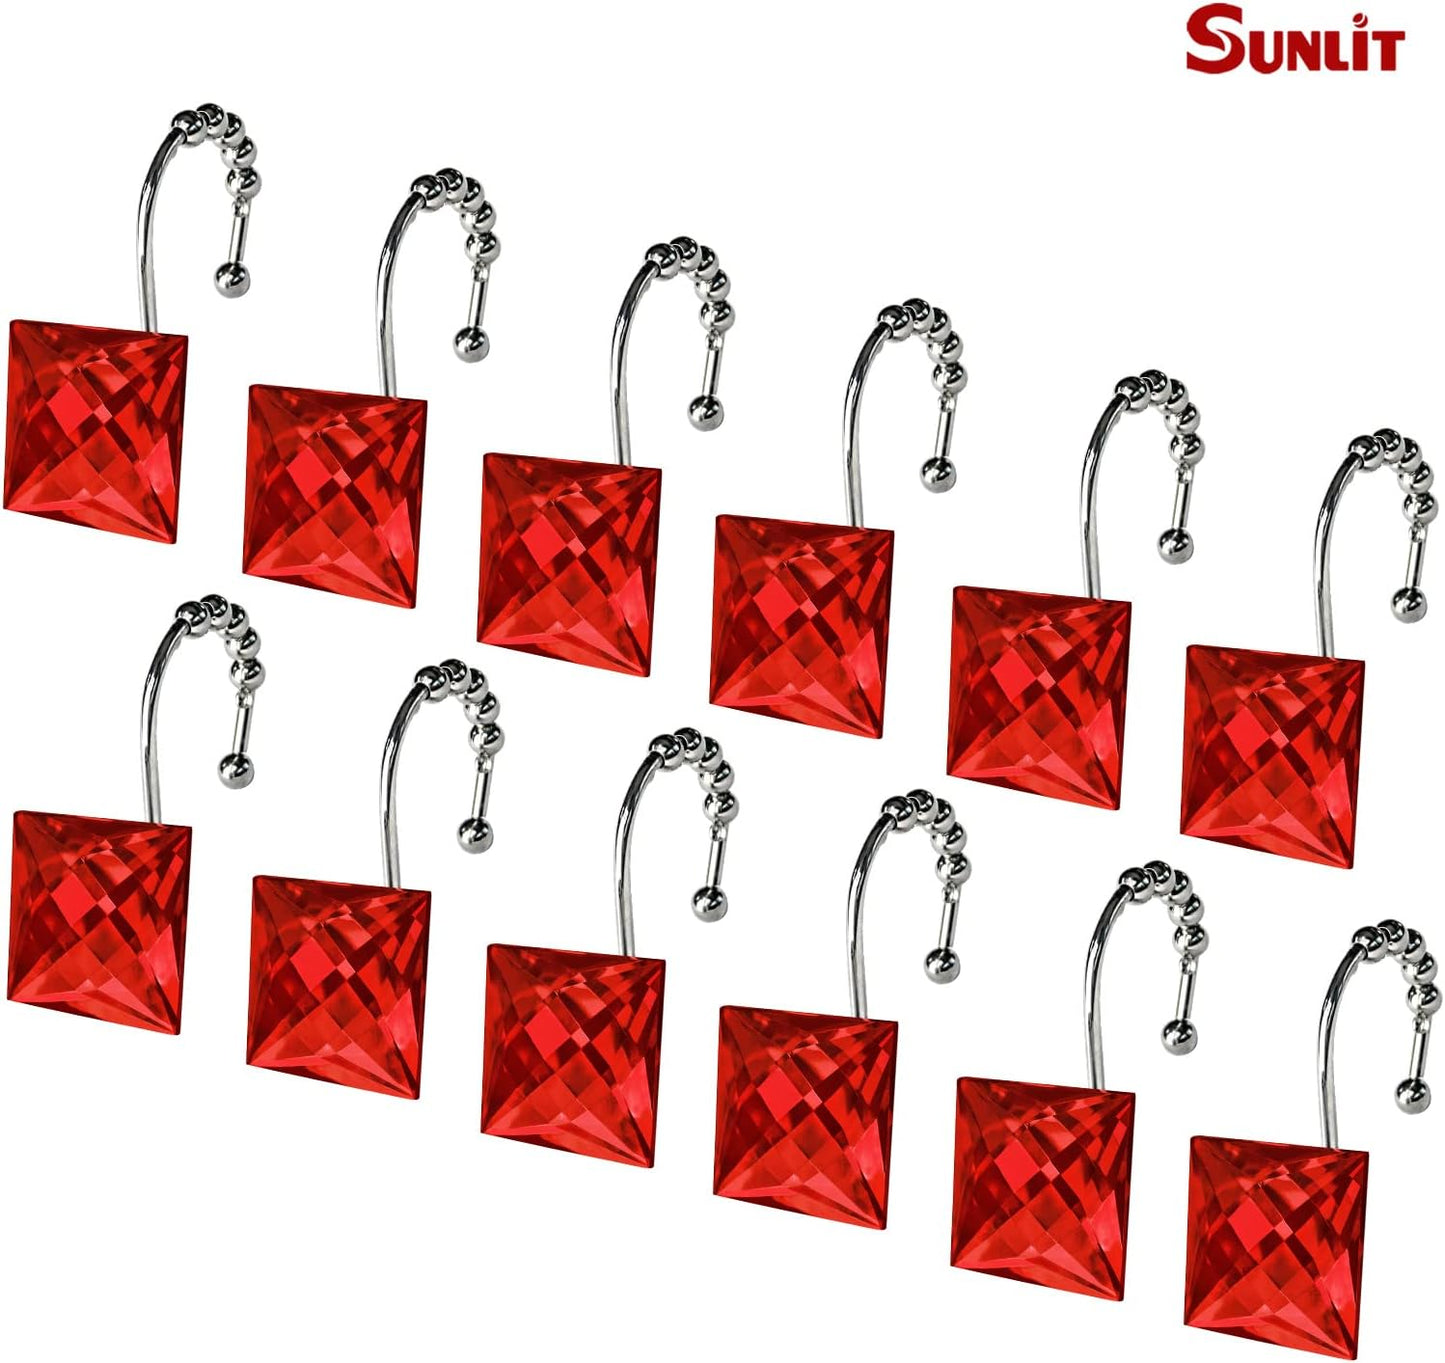 Sunlit Luxury Design Square Red Diamond Crystal Gem Bling with Glide Balls Shower Curtain Hooks, Rust Proof Metal Rhinestones Glam Shower Curtain Rings-12 Pack